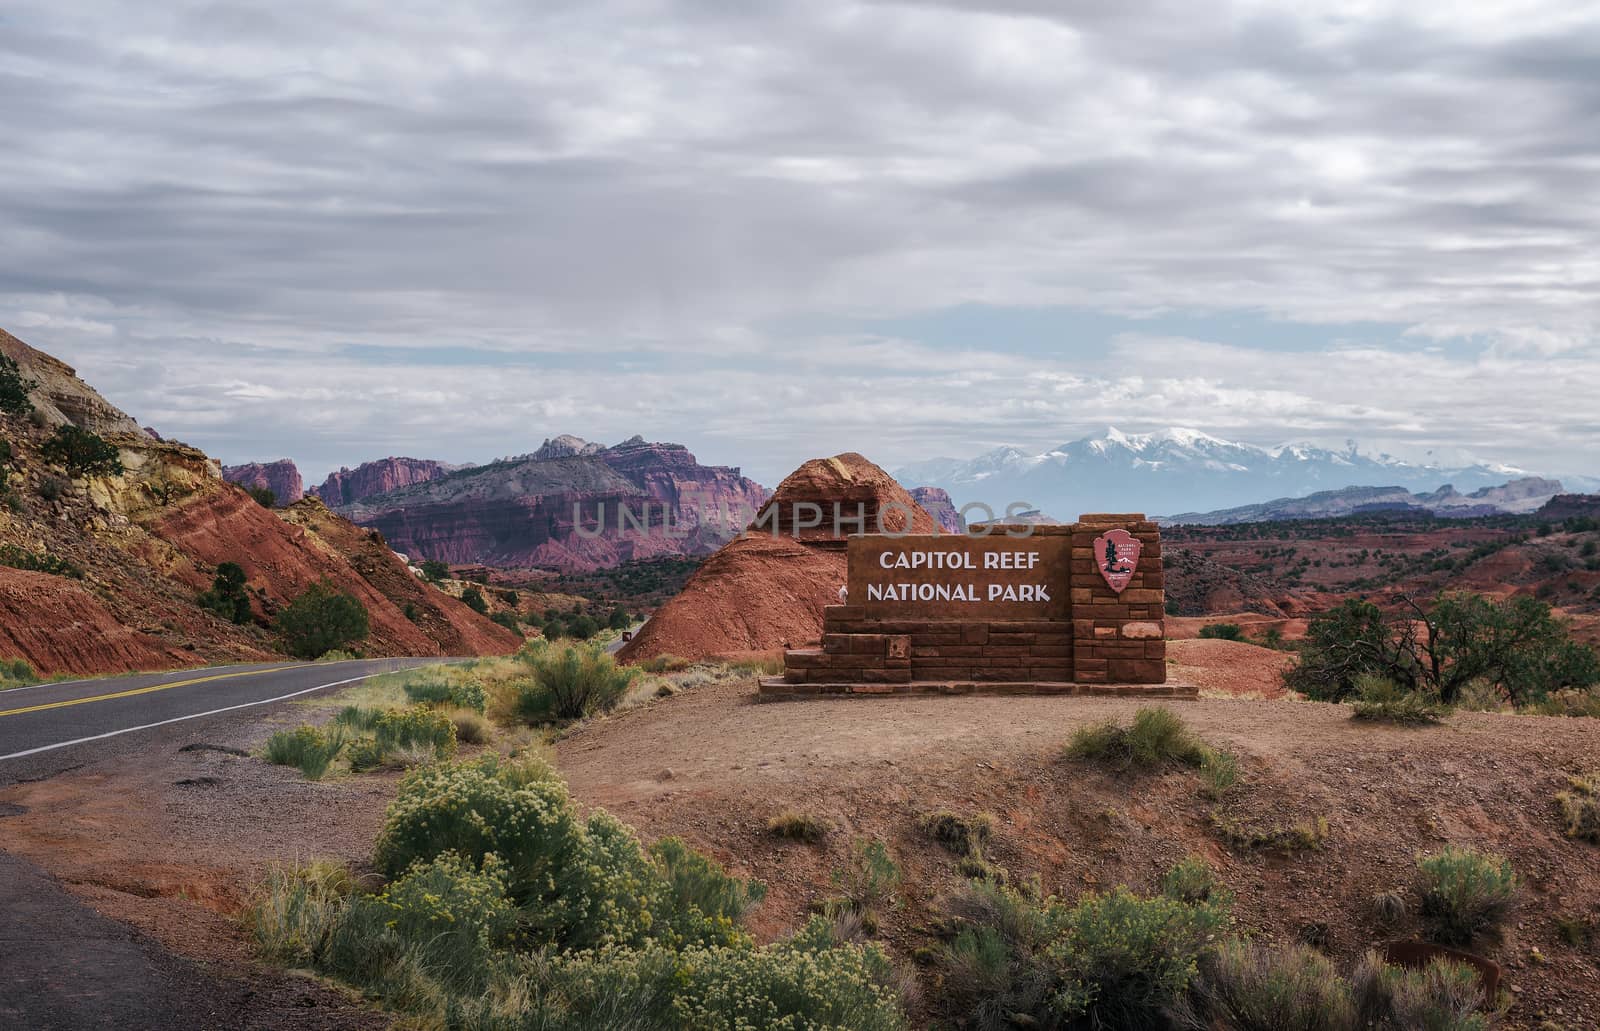 Capitol Reef National Park, Utah, USA - October 20, 2018 : Welcome sign at the entrance to Capitol Reef National park, Utah, with snow covered Rocky Mountains in the background.